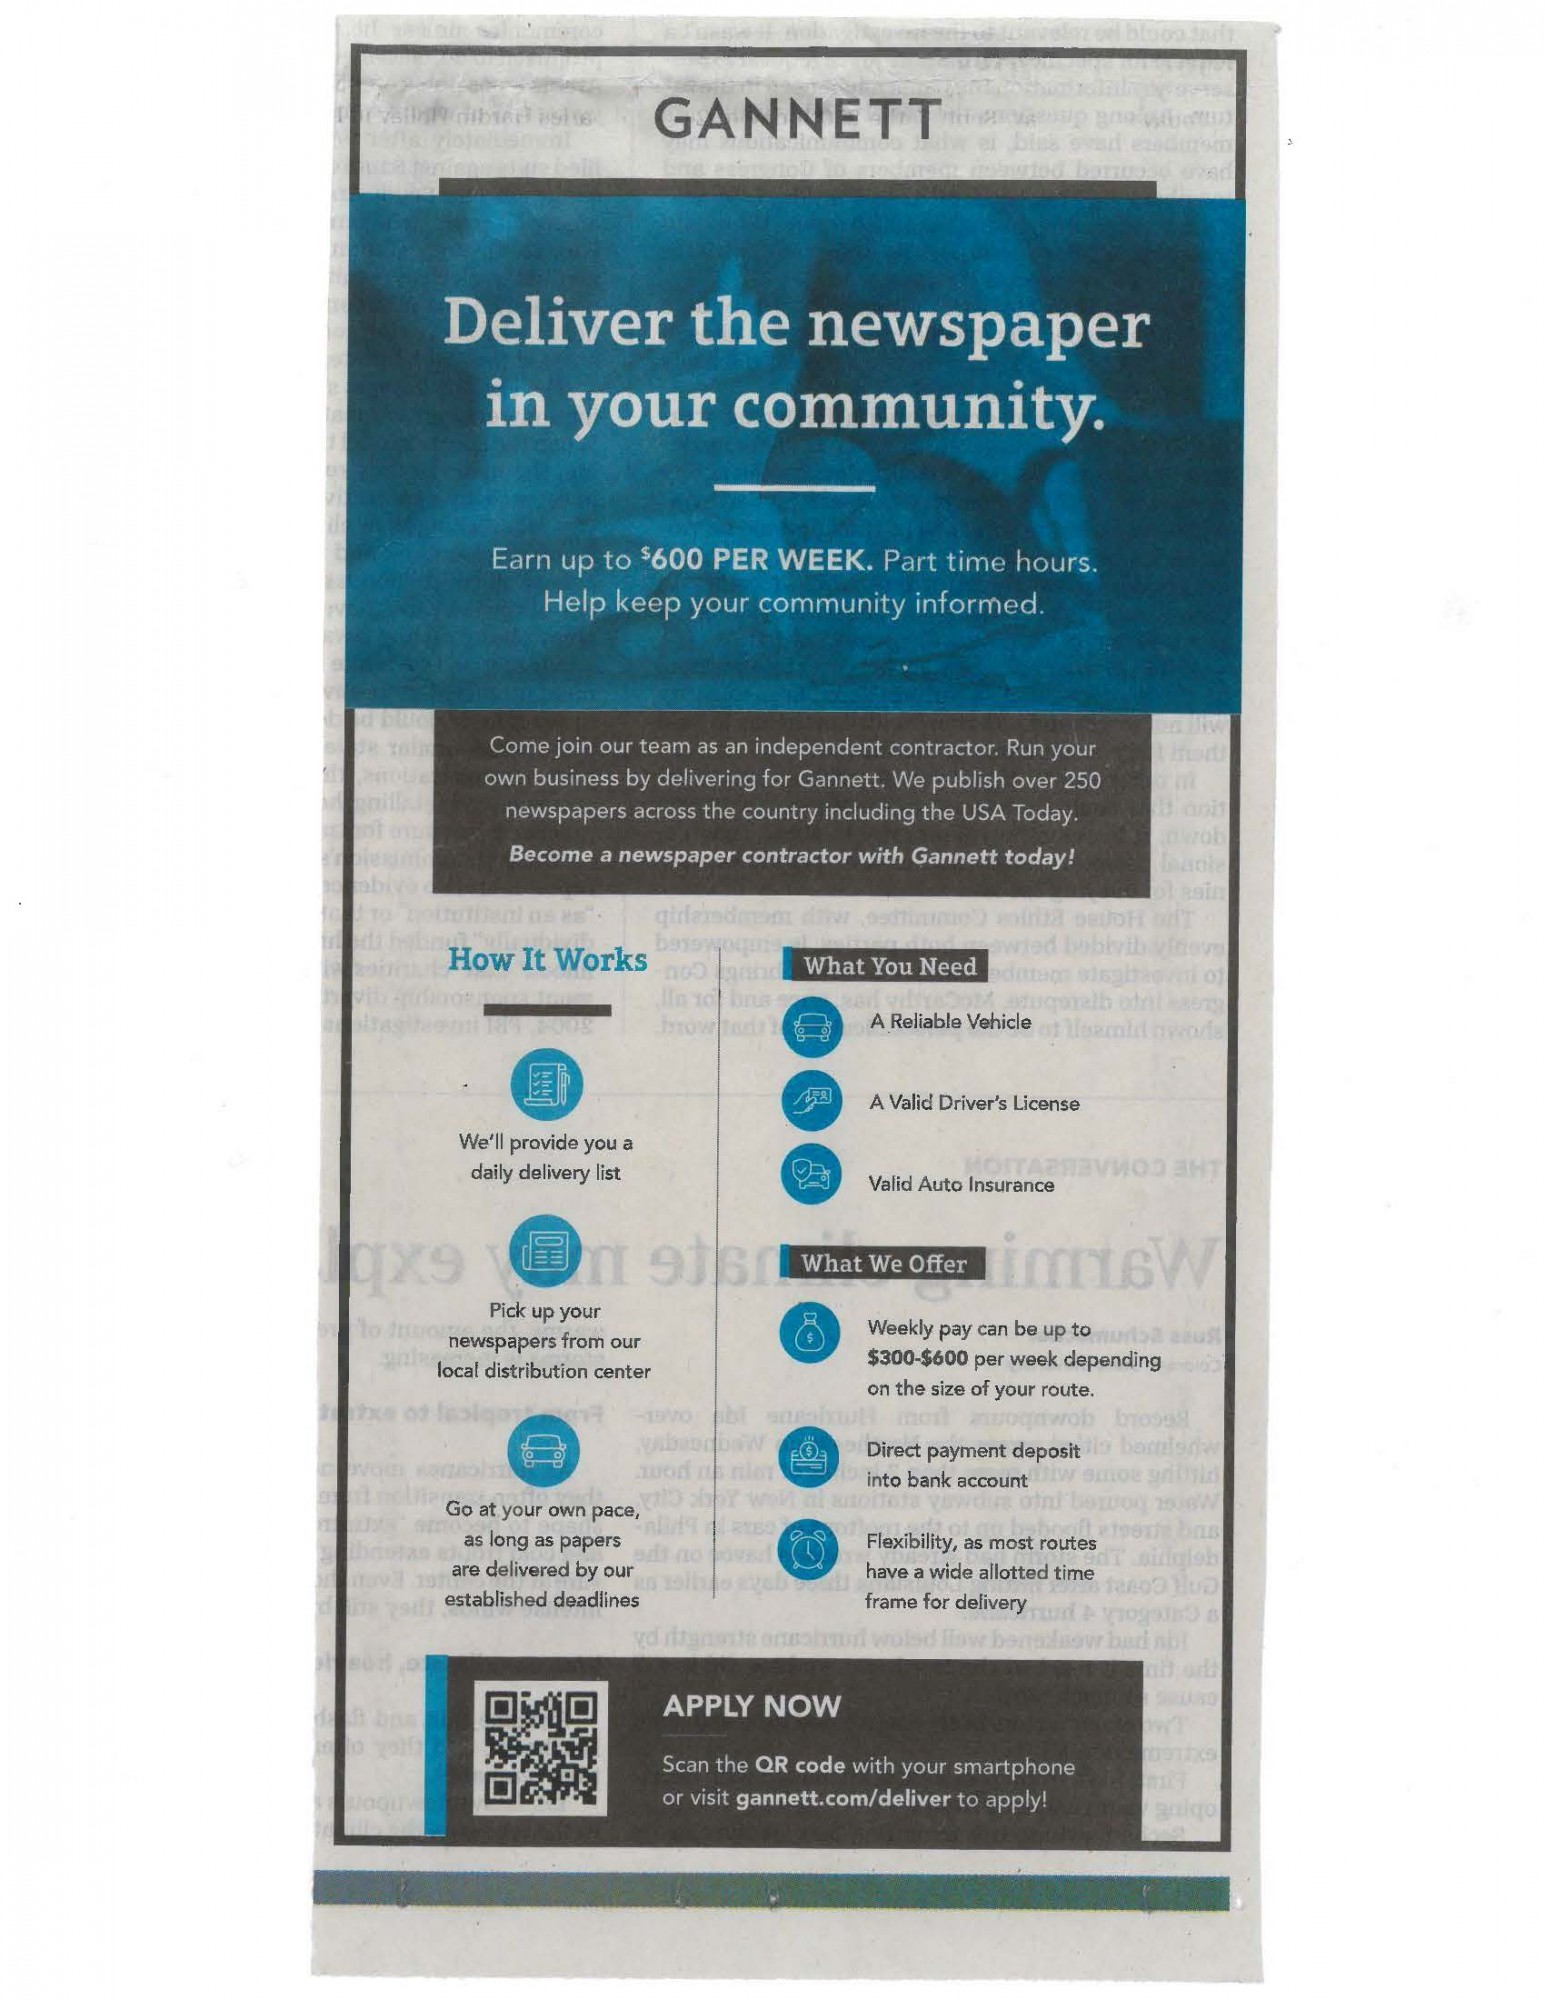 DELIVER THE NEWSPAPER IN YOUR COMMUNITY